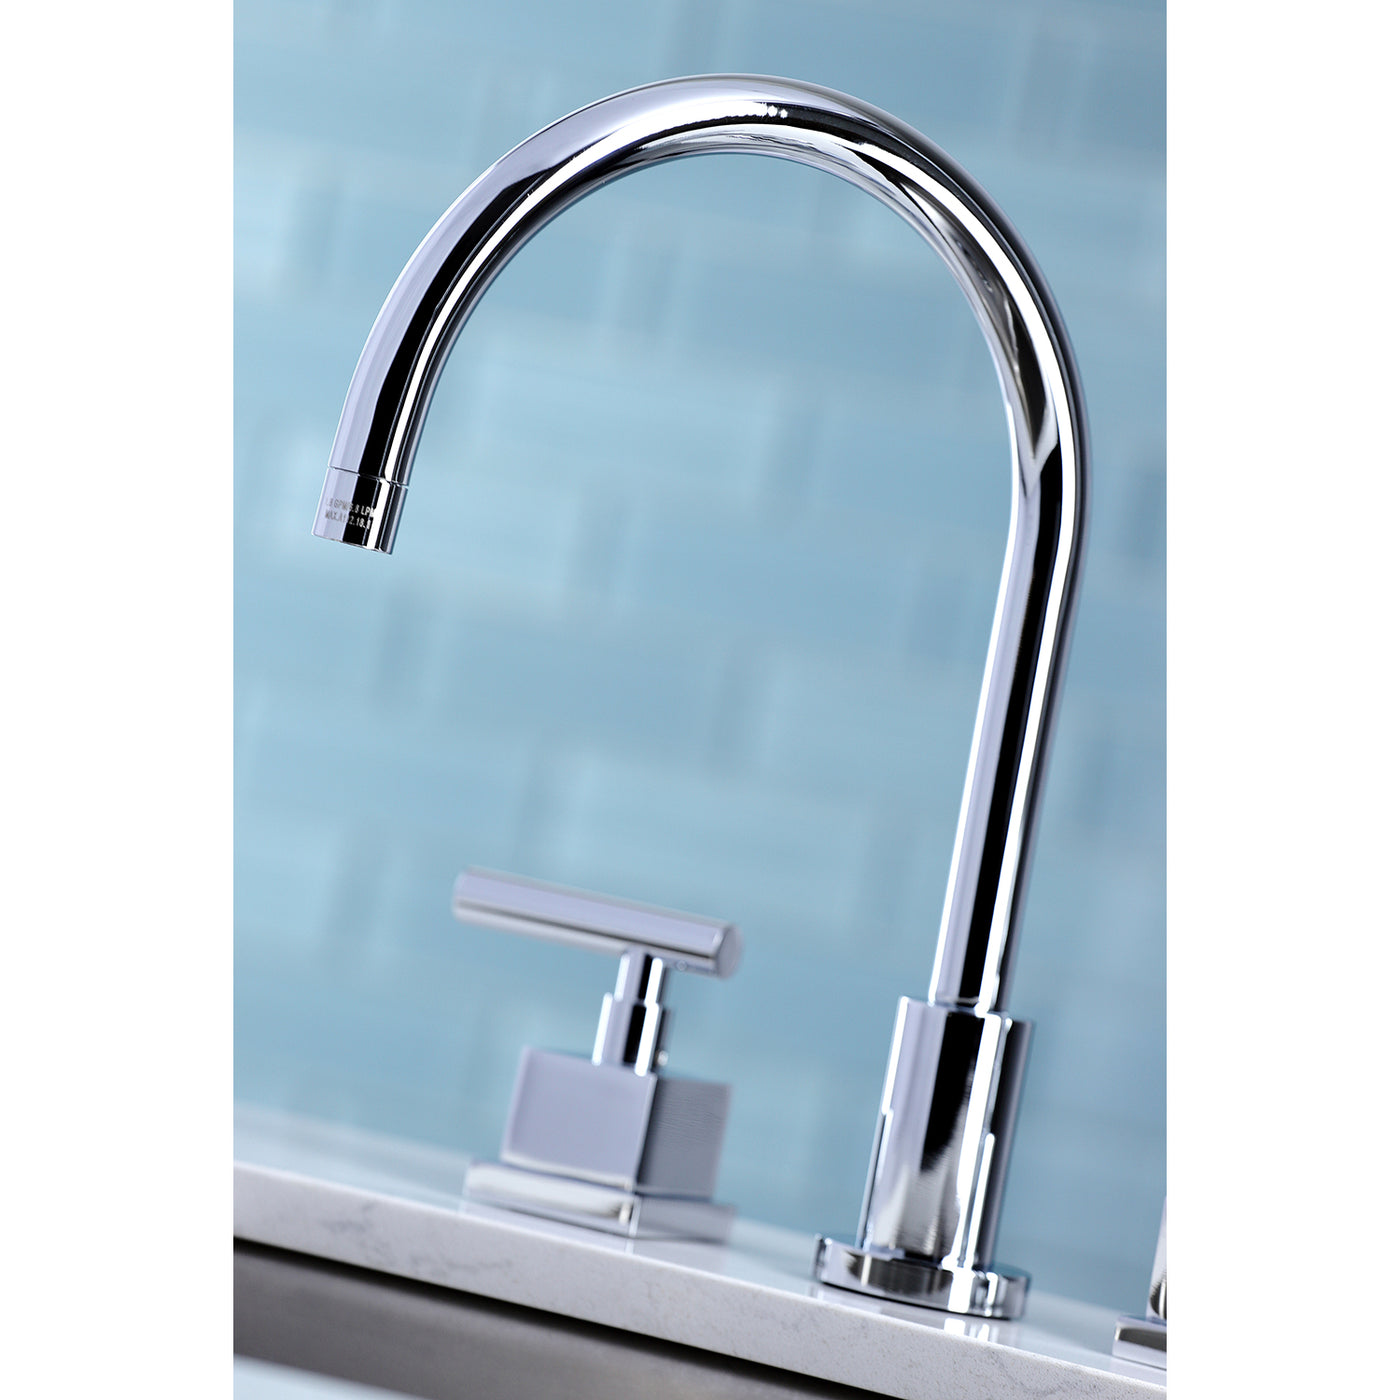 Elements of Design ES8721CQL Widespread Kitchen Faucet with Plastic Sprayer, Polished Chrome